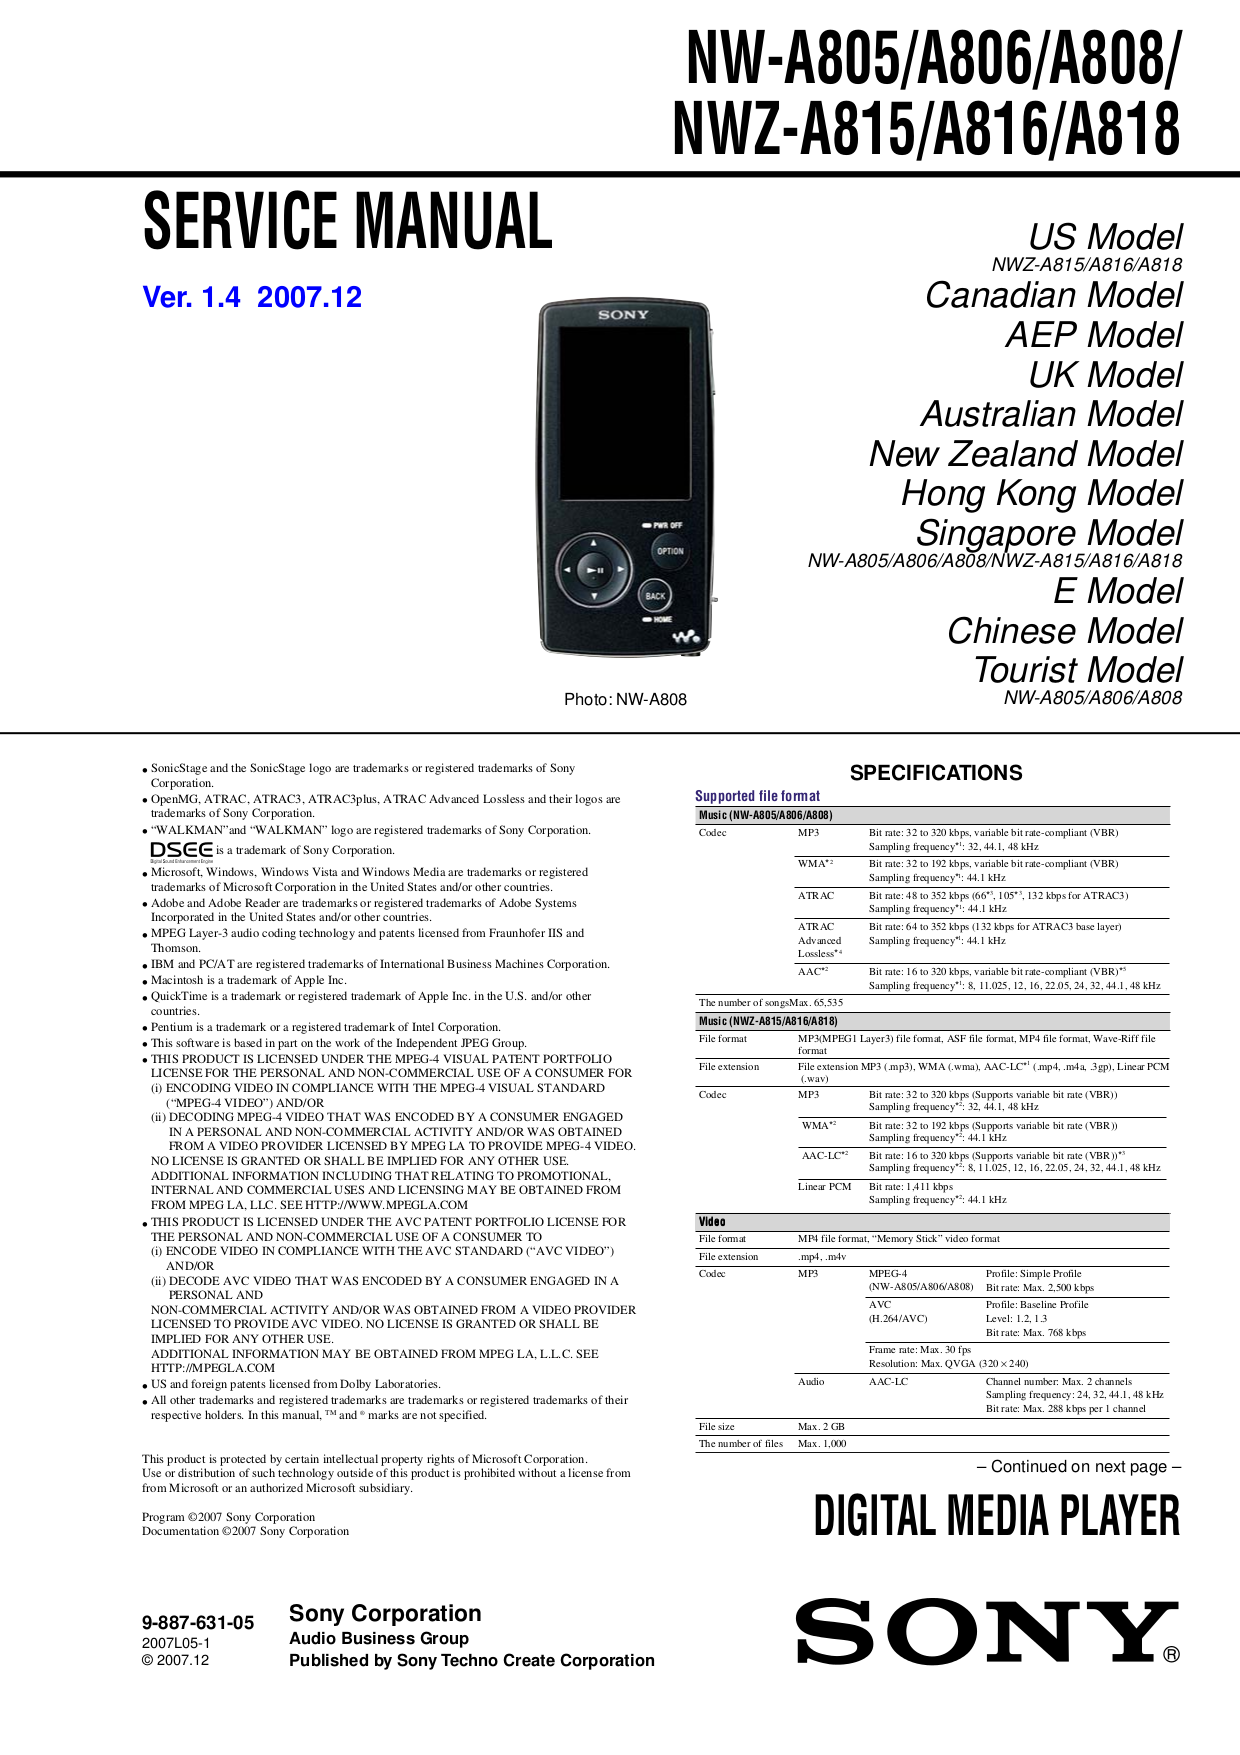 Sony walkman nw-a805 software free download.